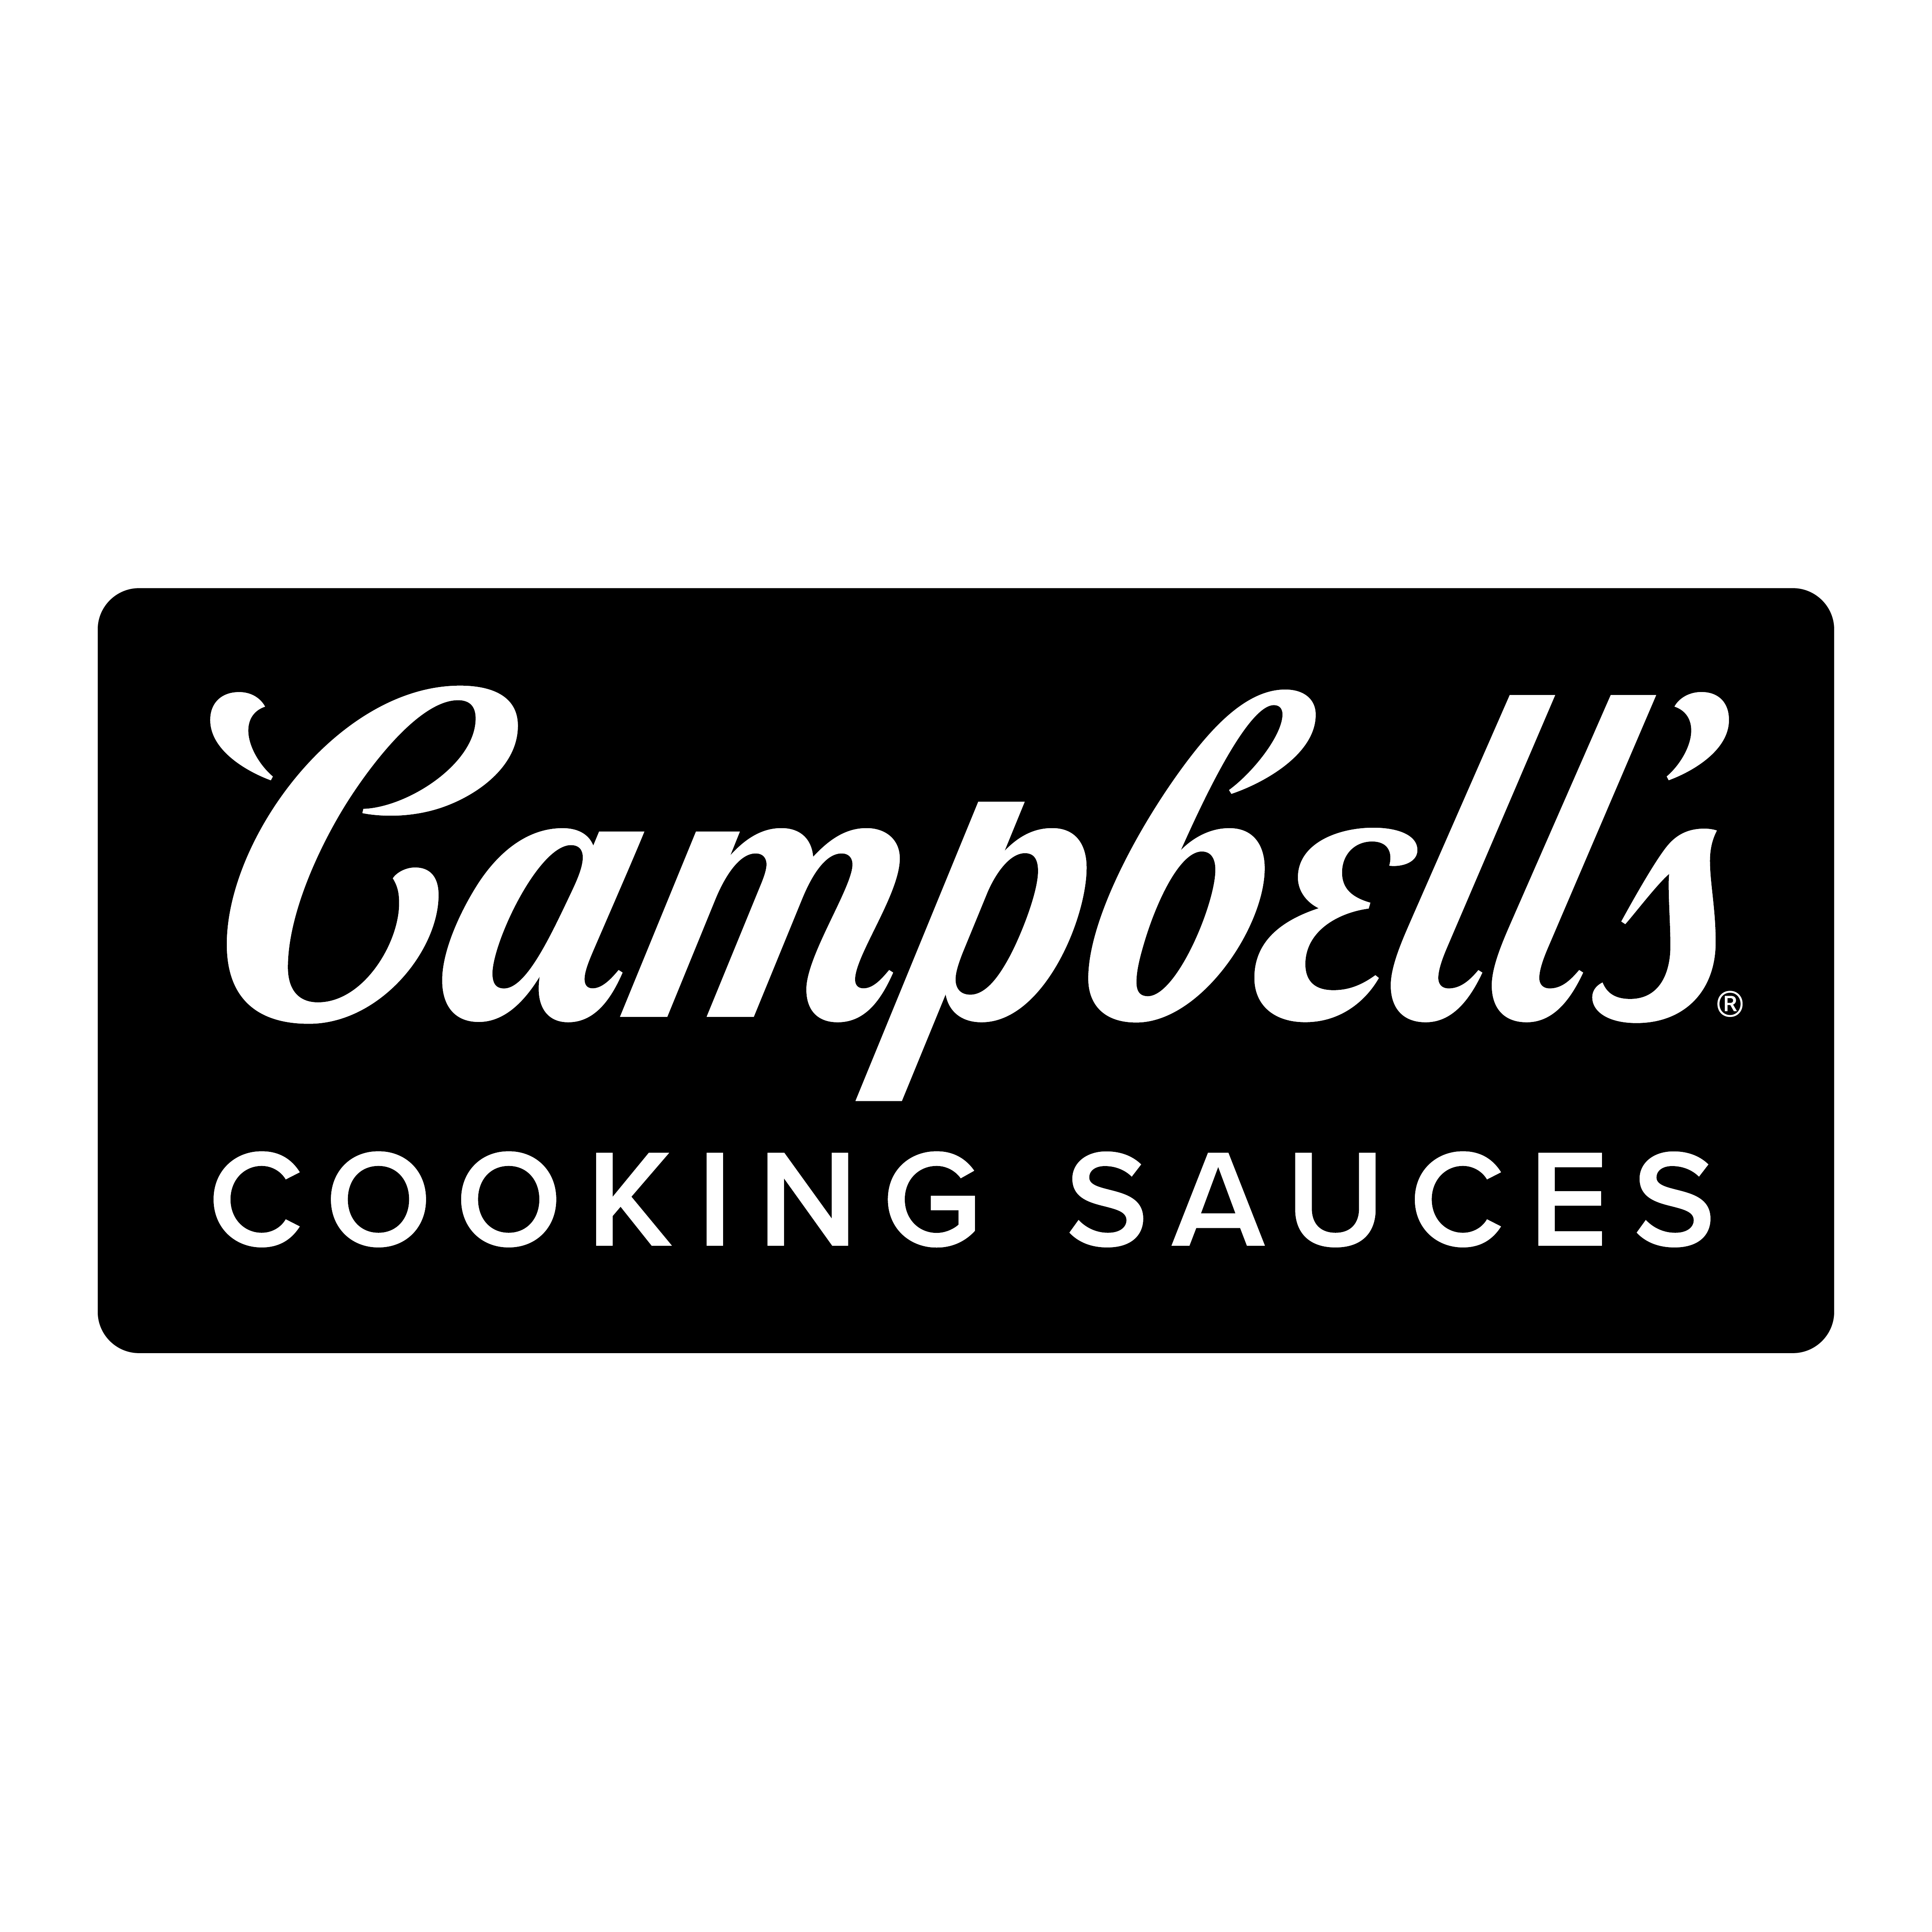 Logos Archives - Campbell Soup Company